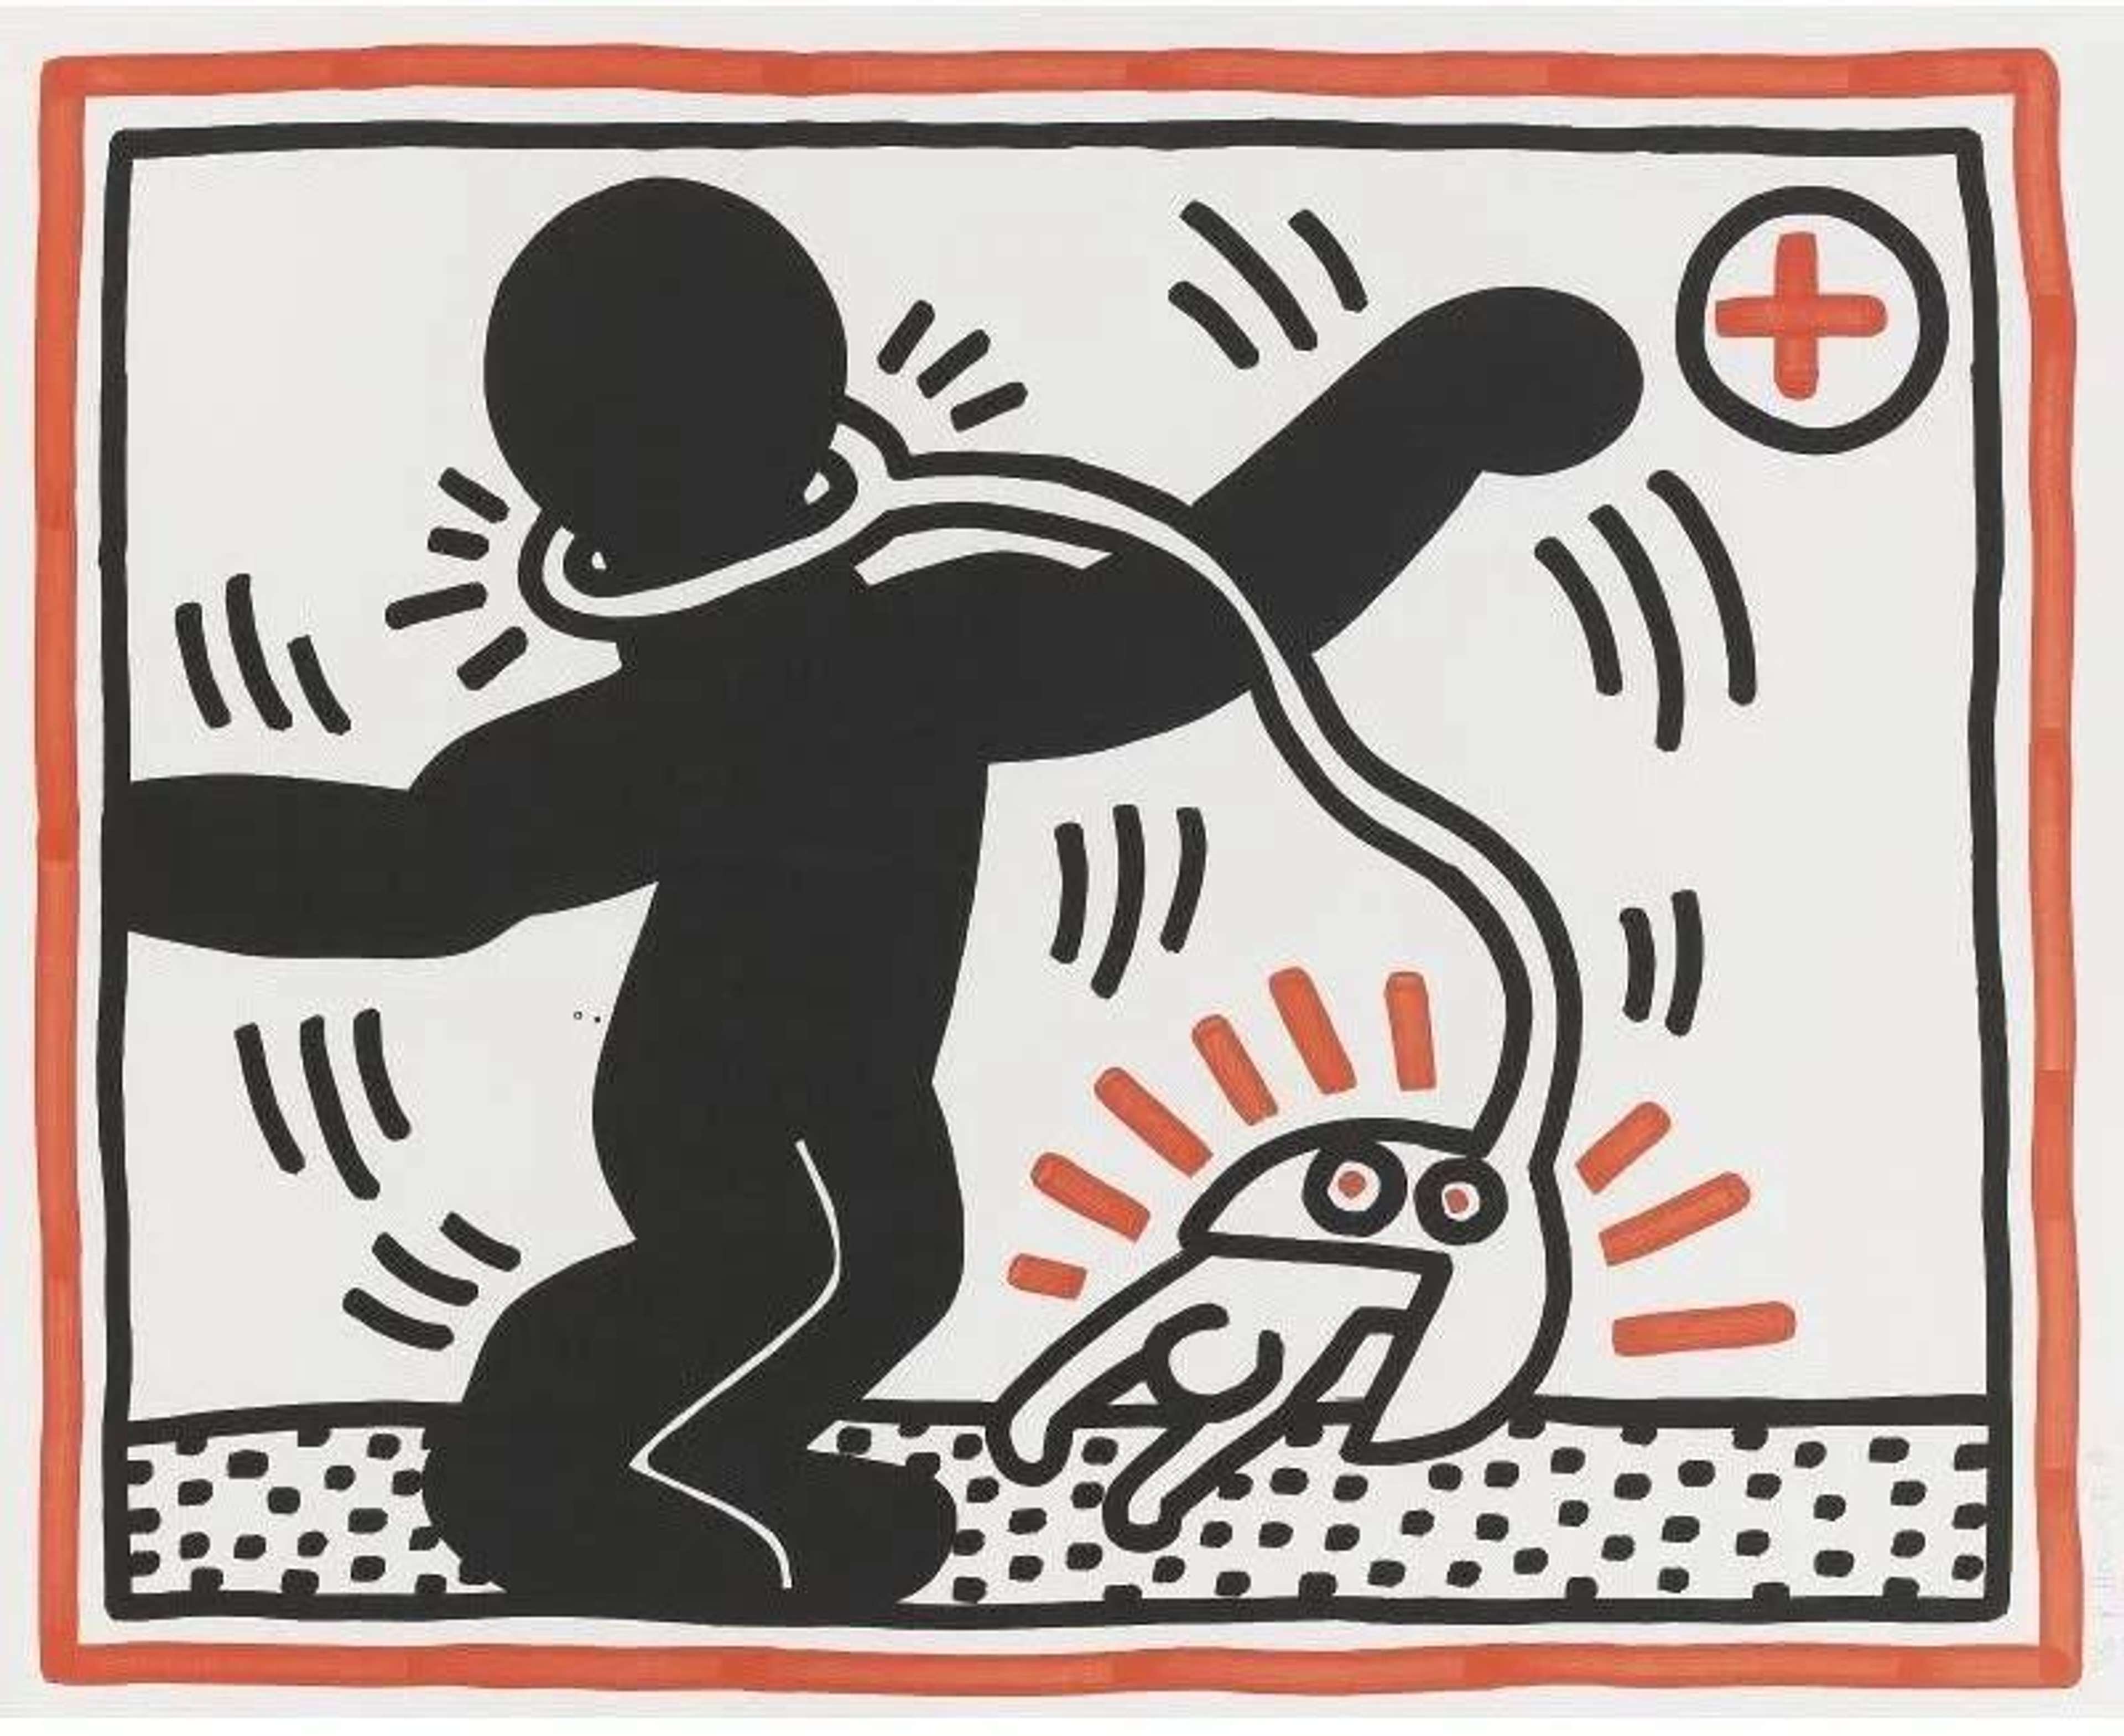 Keith Haring’s Free South Africa 1. A Pop Art print of a black figure raising its foot, stepping on the outline of a white figure.